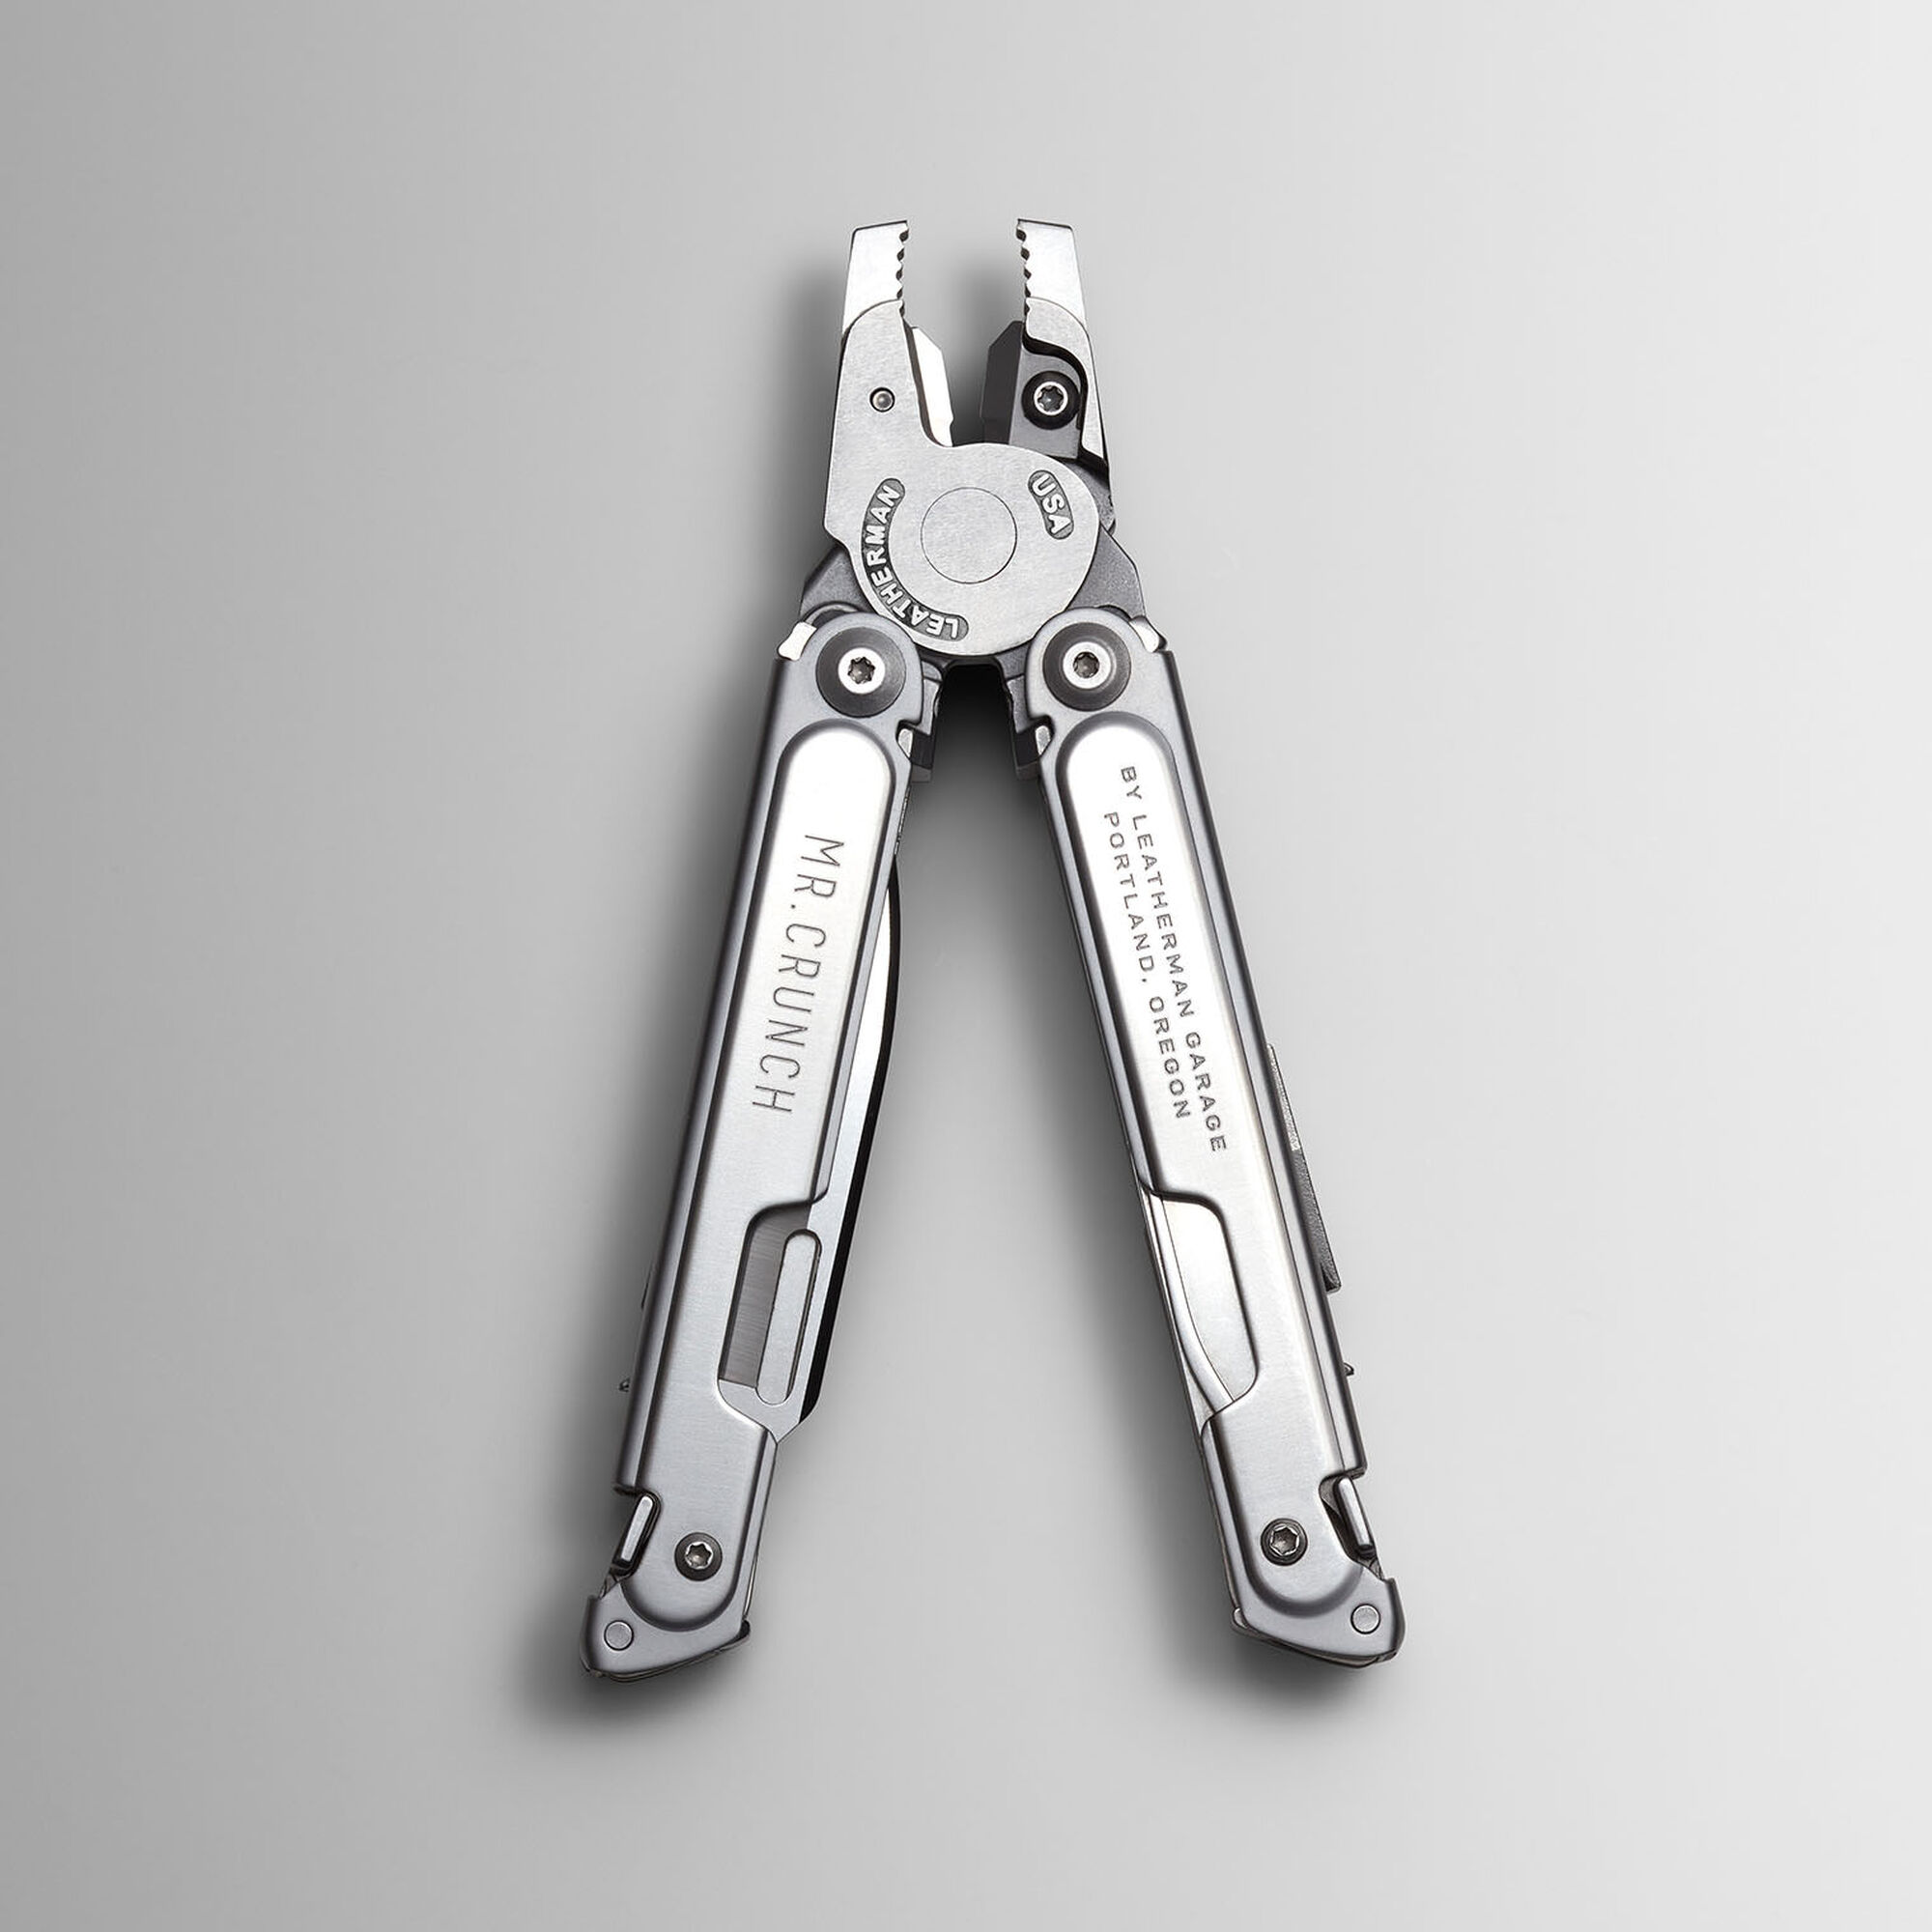 Custom ARC on its way a couple days after ordering! Can't wait! : r/ Leatherman